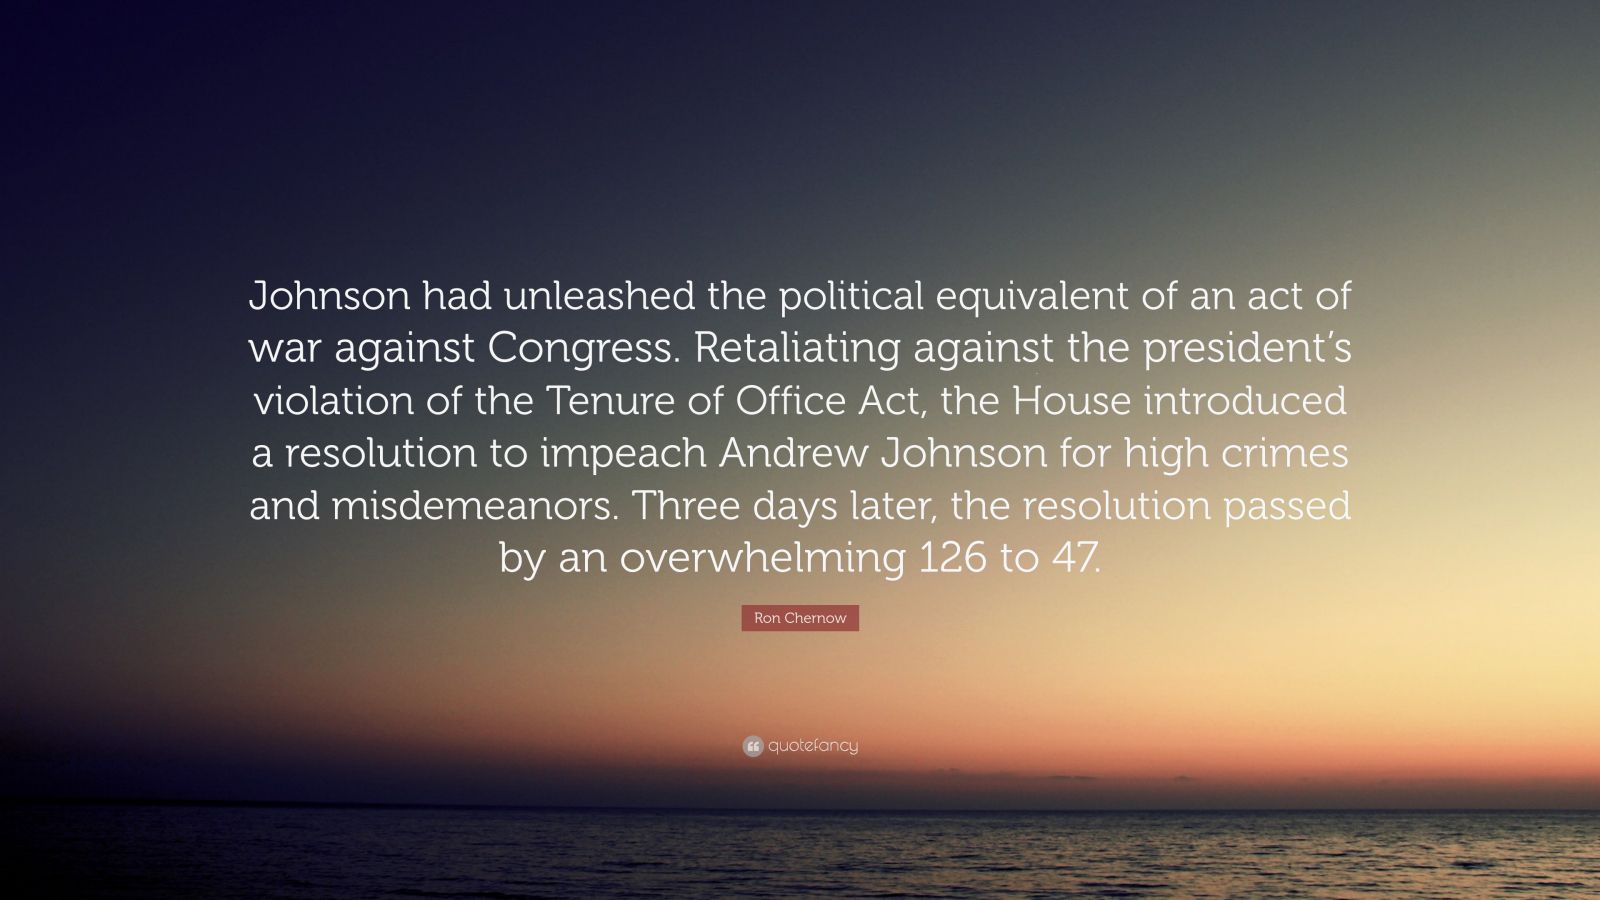 Ron Chernow Quote: “Johnson had unleashed the political equivalent of an act  of war against Congress. Retaliating against the president's vi...”